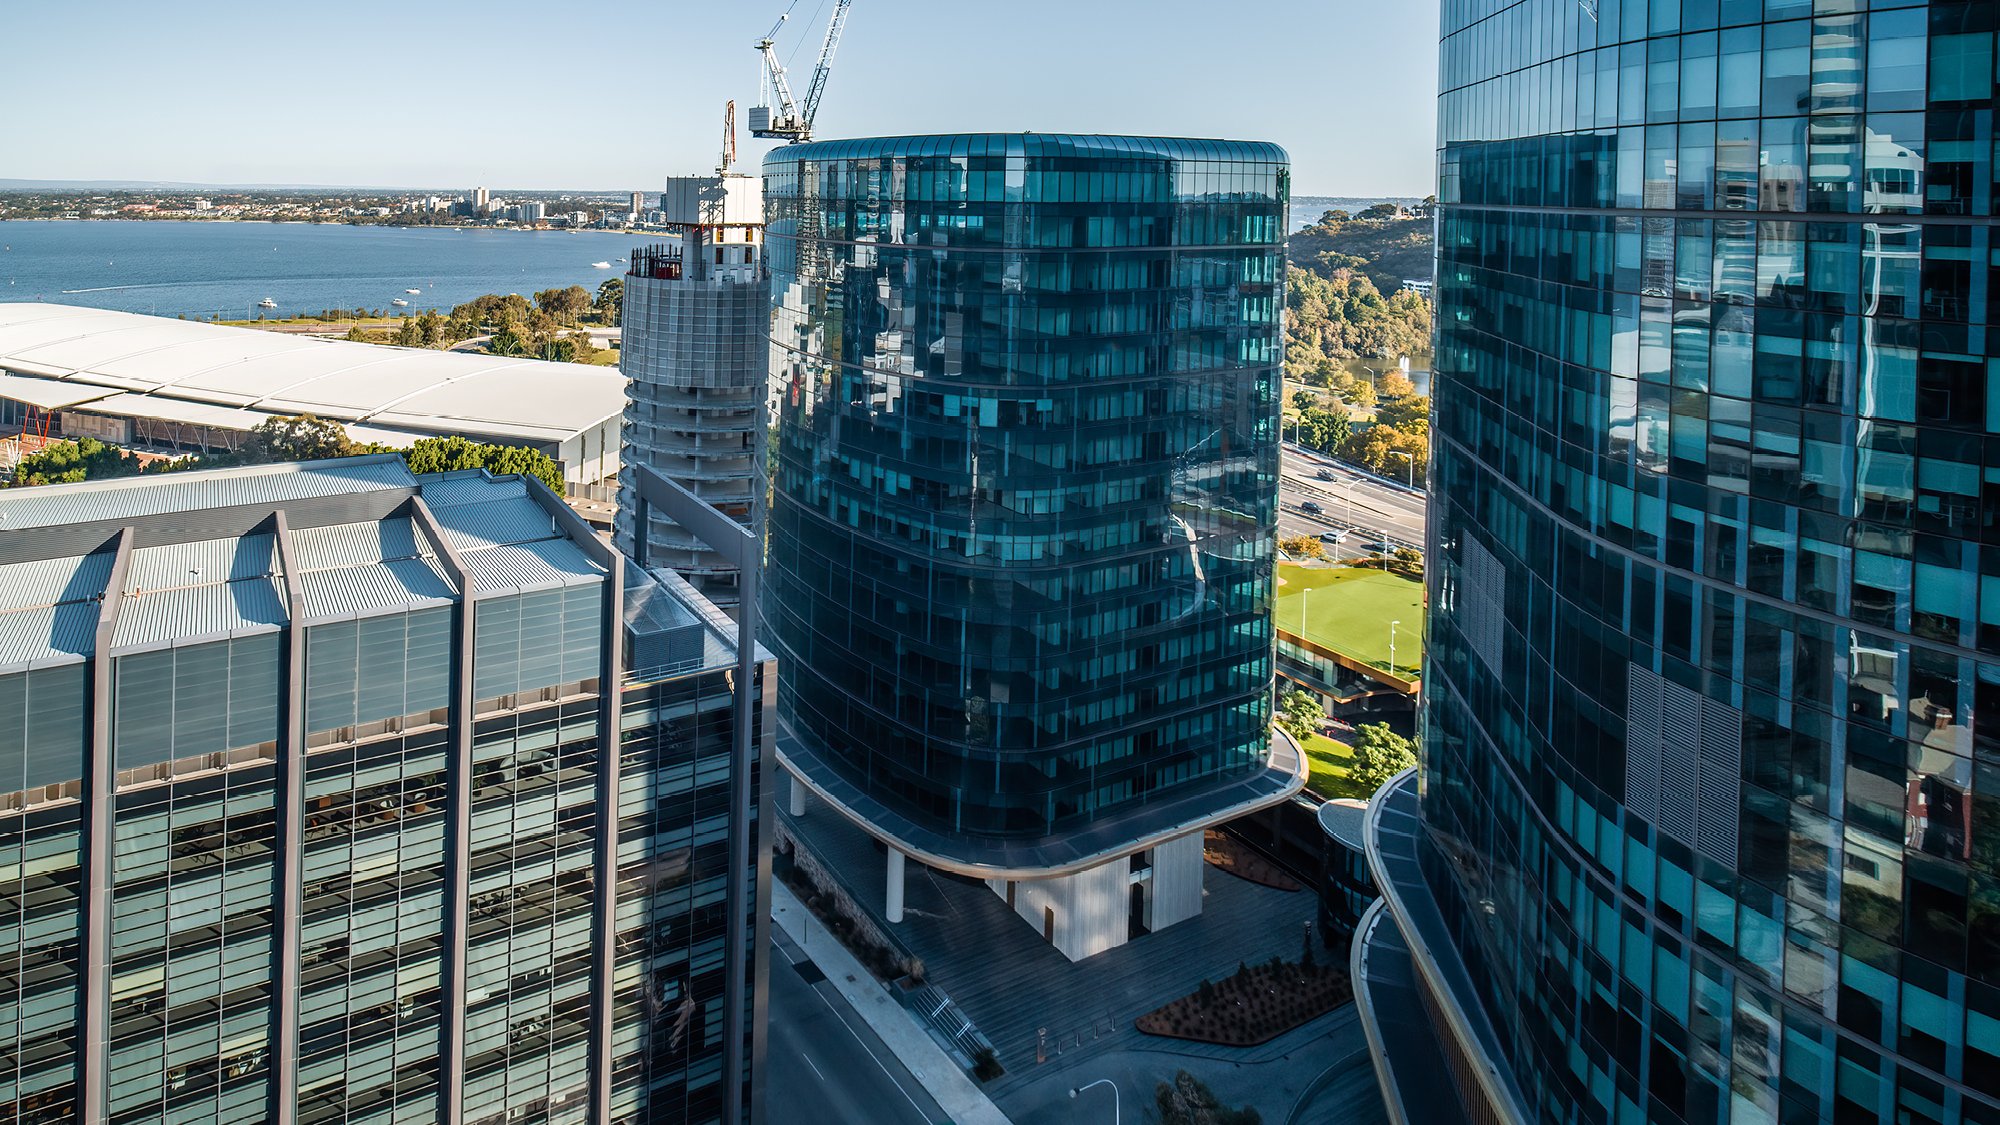 Photograph looking over an office tower of 15 storeys to the land and bayswater behind